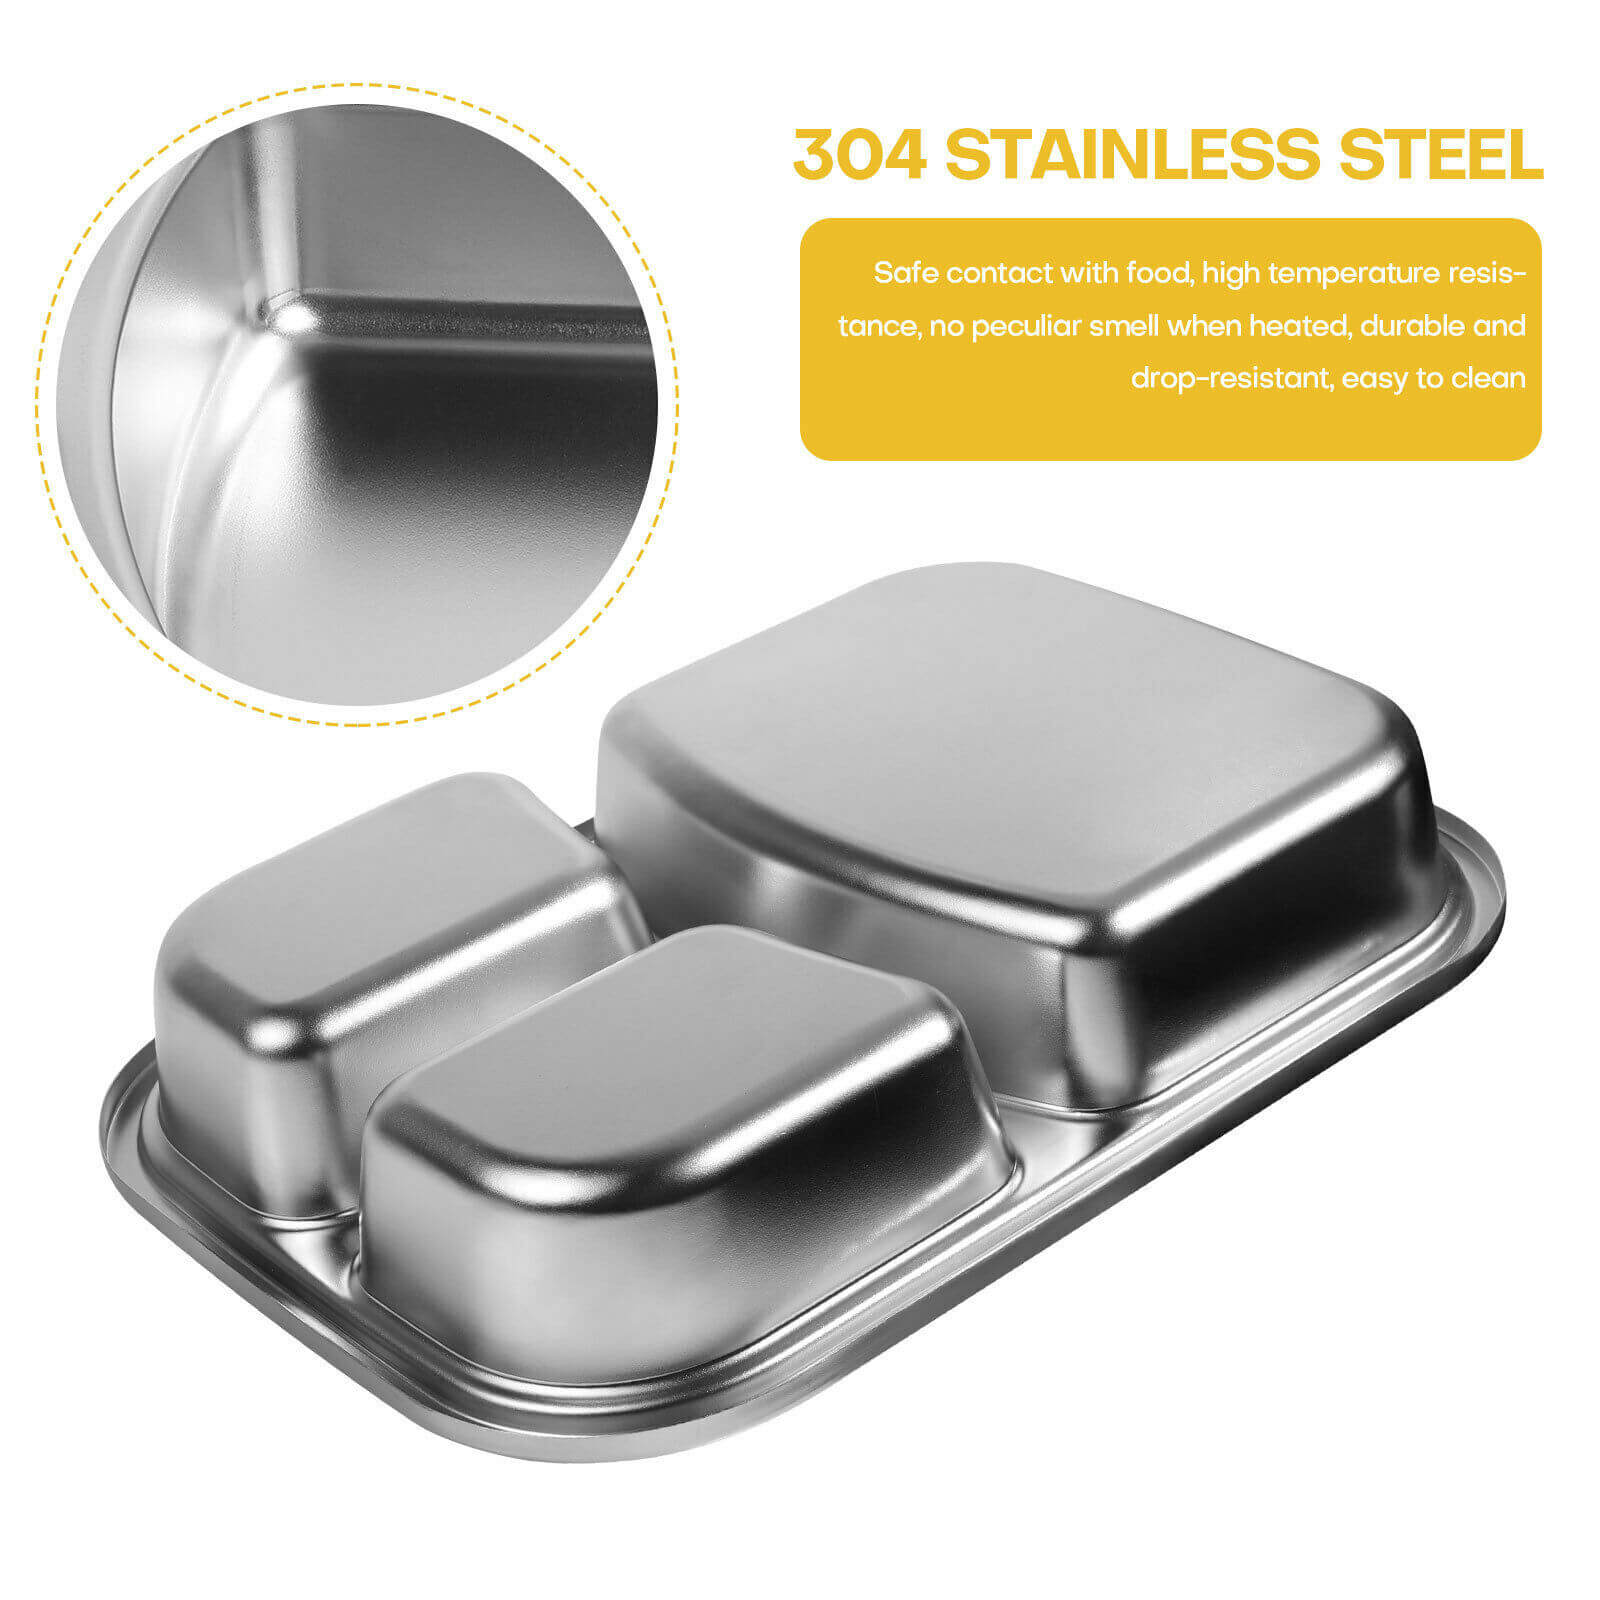 Plug-in 304 Stainless Steel Heated Lunch Box Portable Water-free